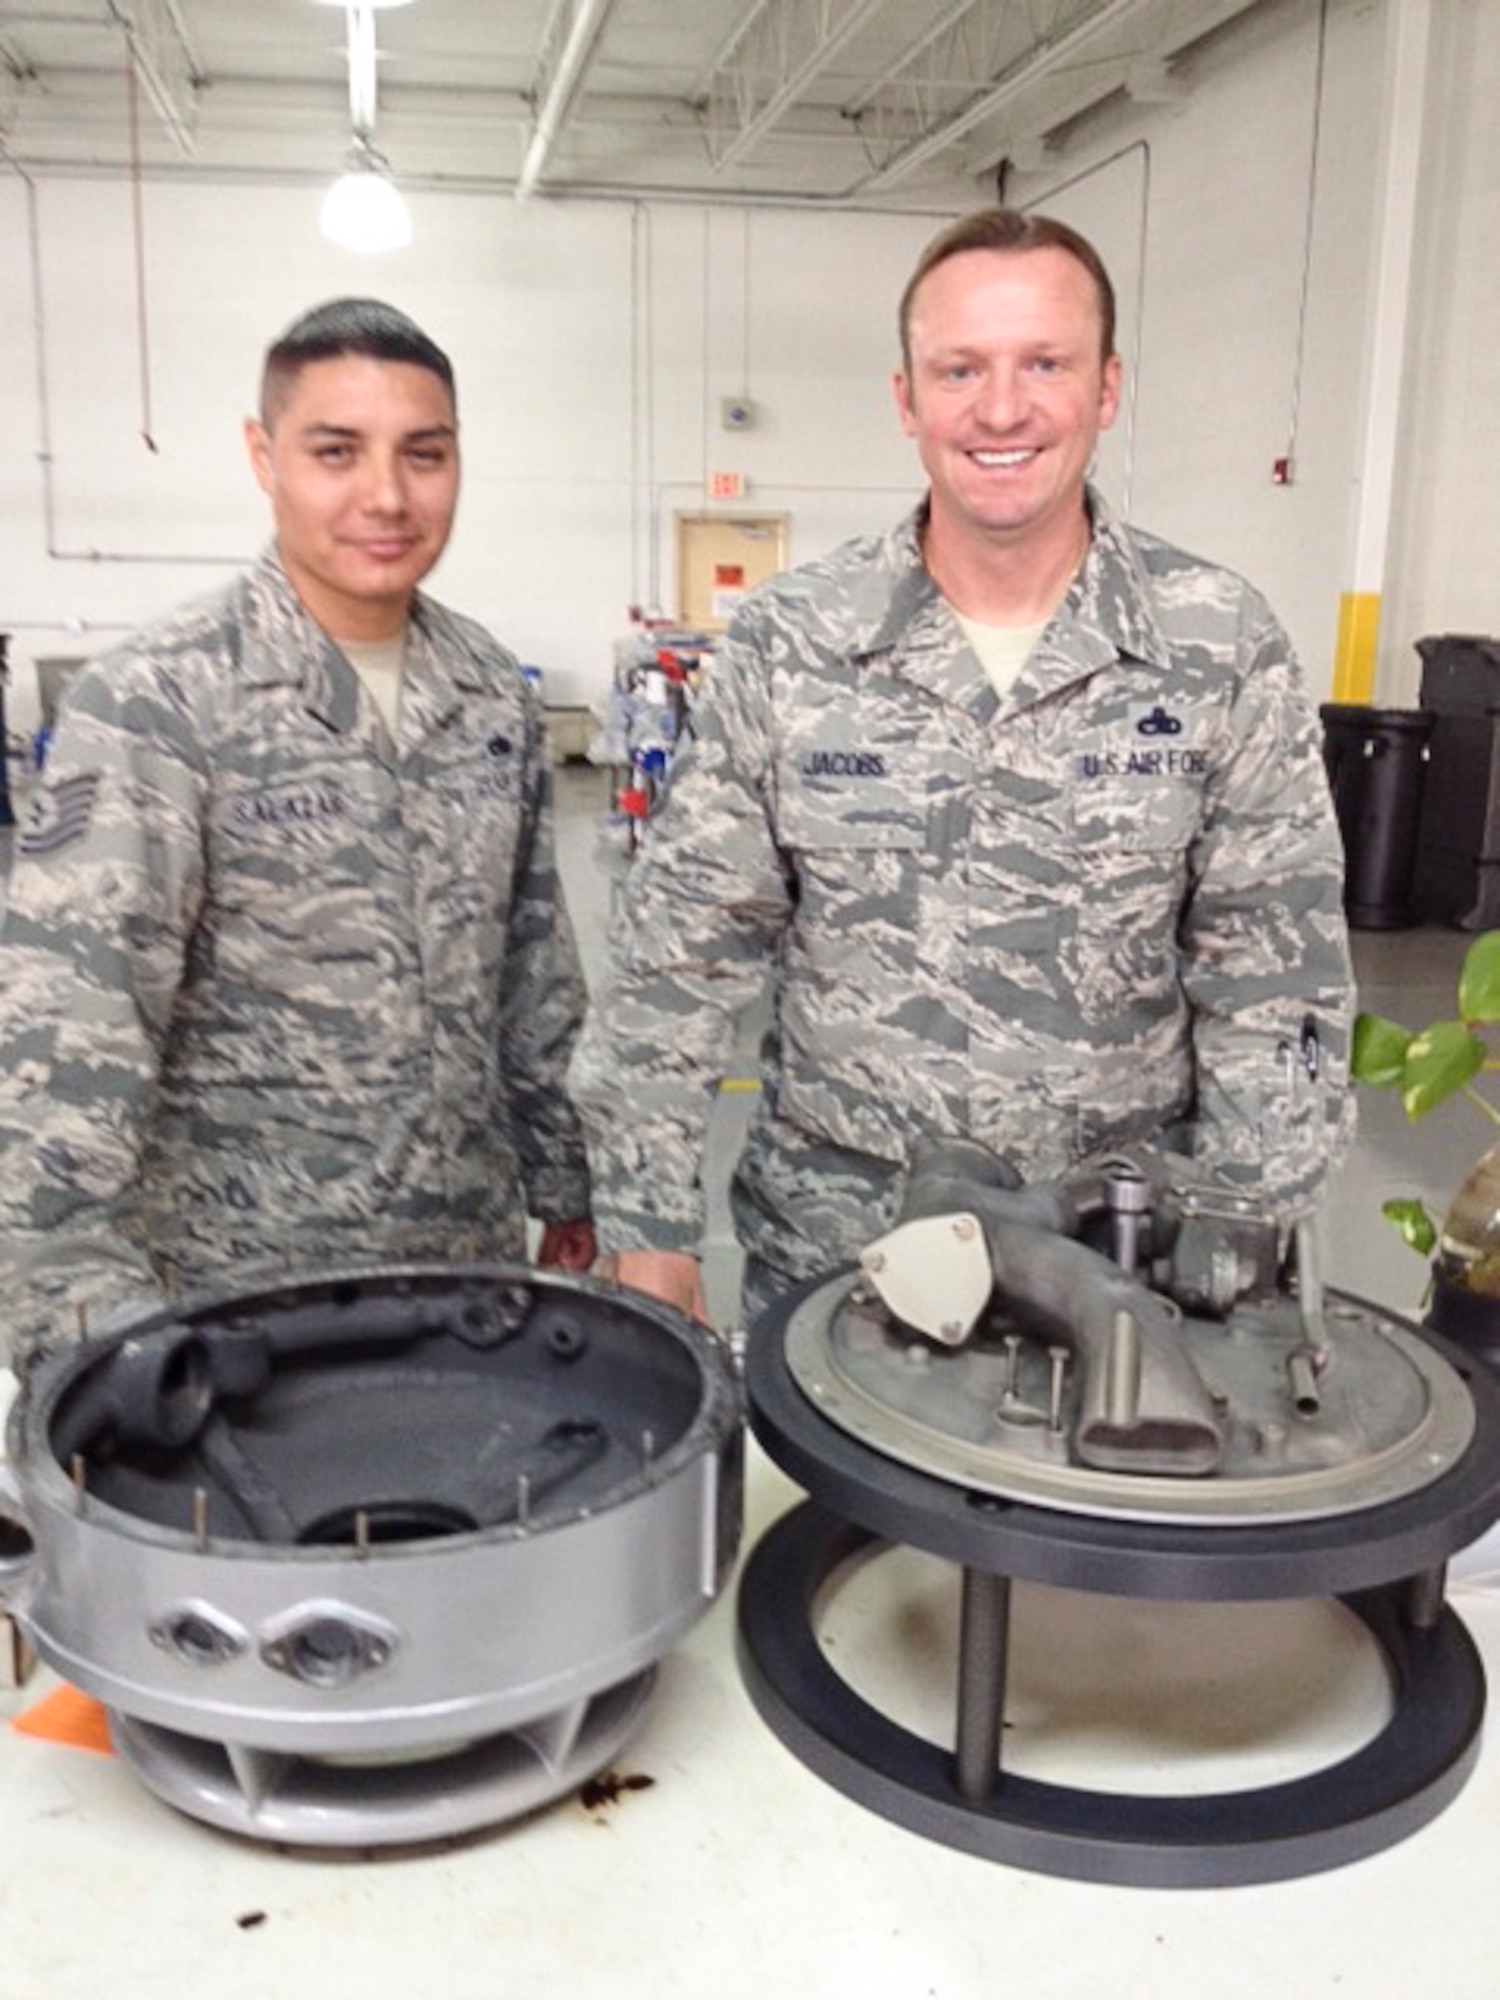 Tech. Sgt. Joseph Salazar, 12th Air Force (Air Forces Southern) Noncommissioned officer in charge of Tactical Aircraft, and Master Sgt. Jeremy Jacobs, 12th Air Force (Air Forces Southern) Tactical Aircraft Manager, smile after examining different sections of the PT6A turboprop engine on Dec. 15, 2014 in Miami, Fl. As part of building partner capacity, personnel in the aircraft maintenance and munitions branch provide aviation maintenance support by offering technical advice to partner nations for maintaining their fleet of aircraft. (Courtesy Photo)